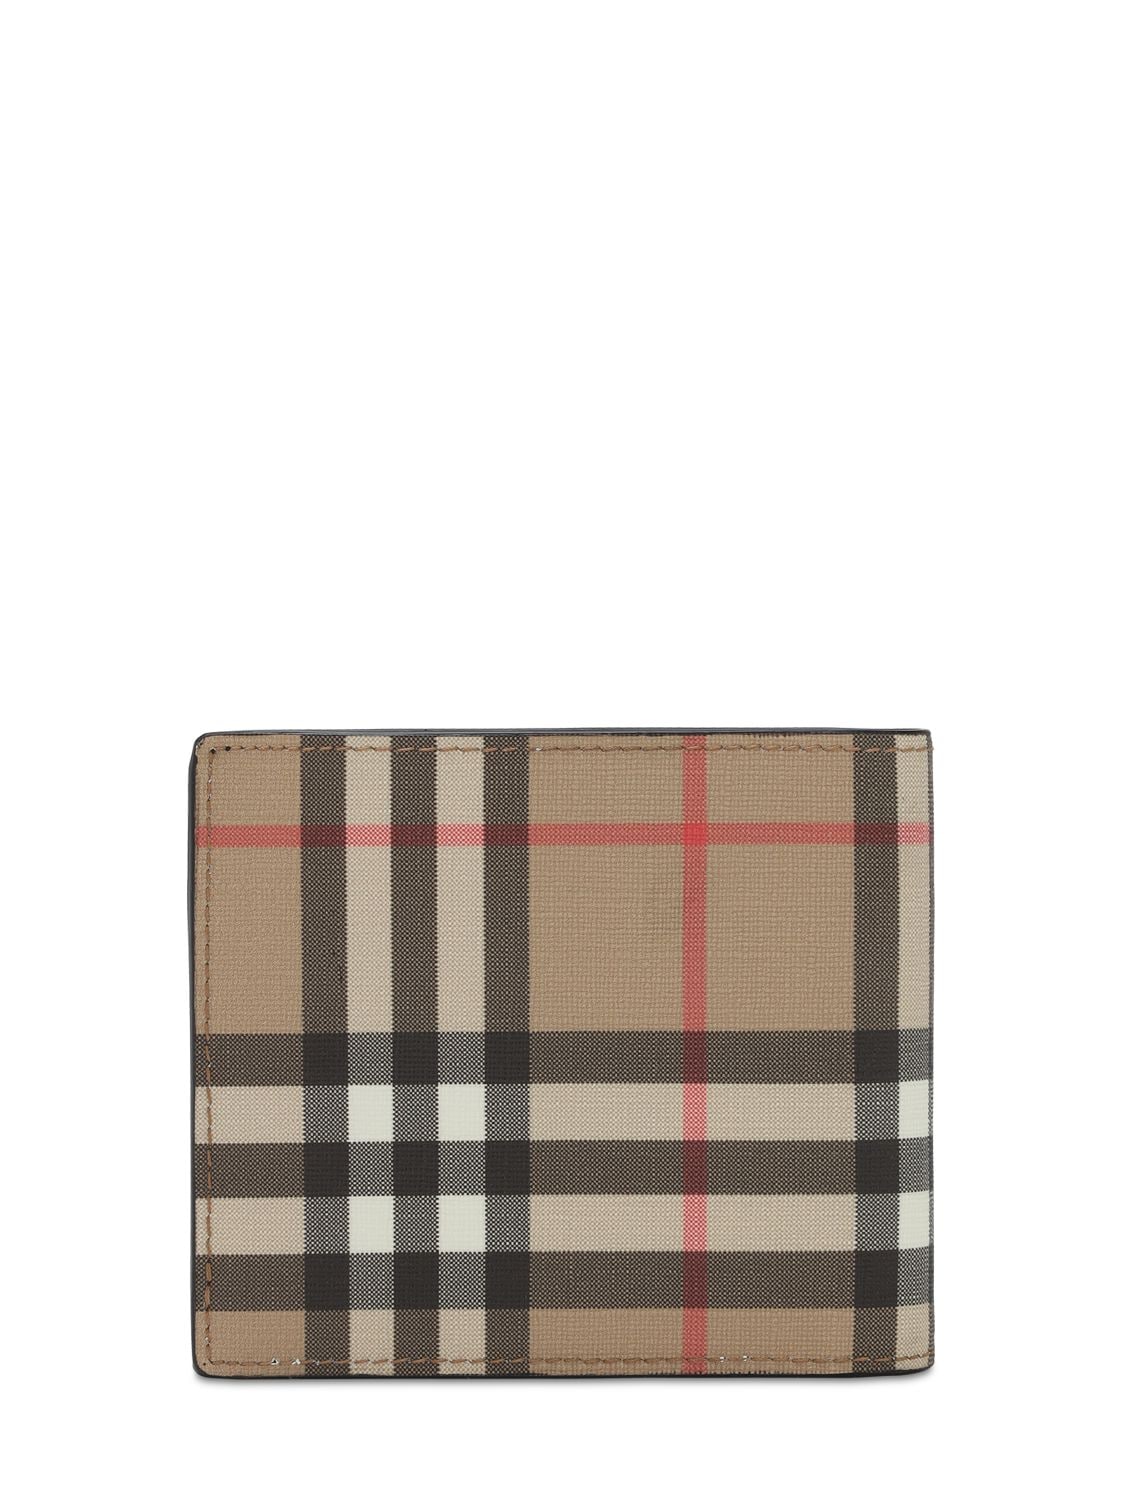 BURBERRY TECH COATED CHECK COIN WALLET